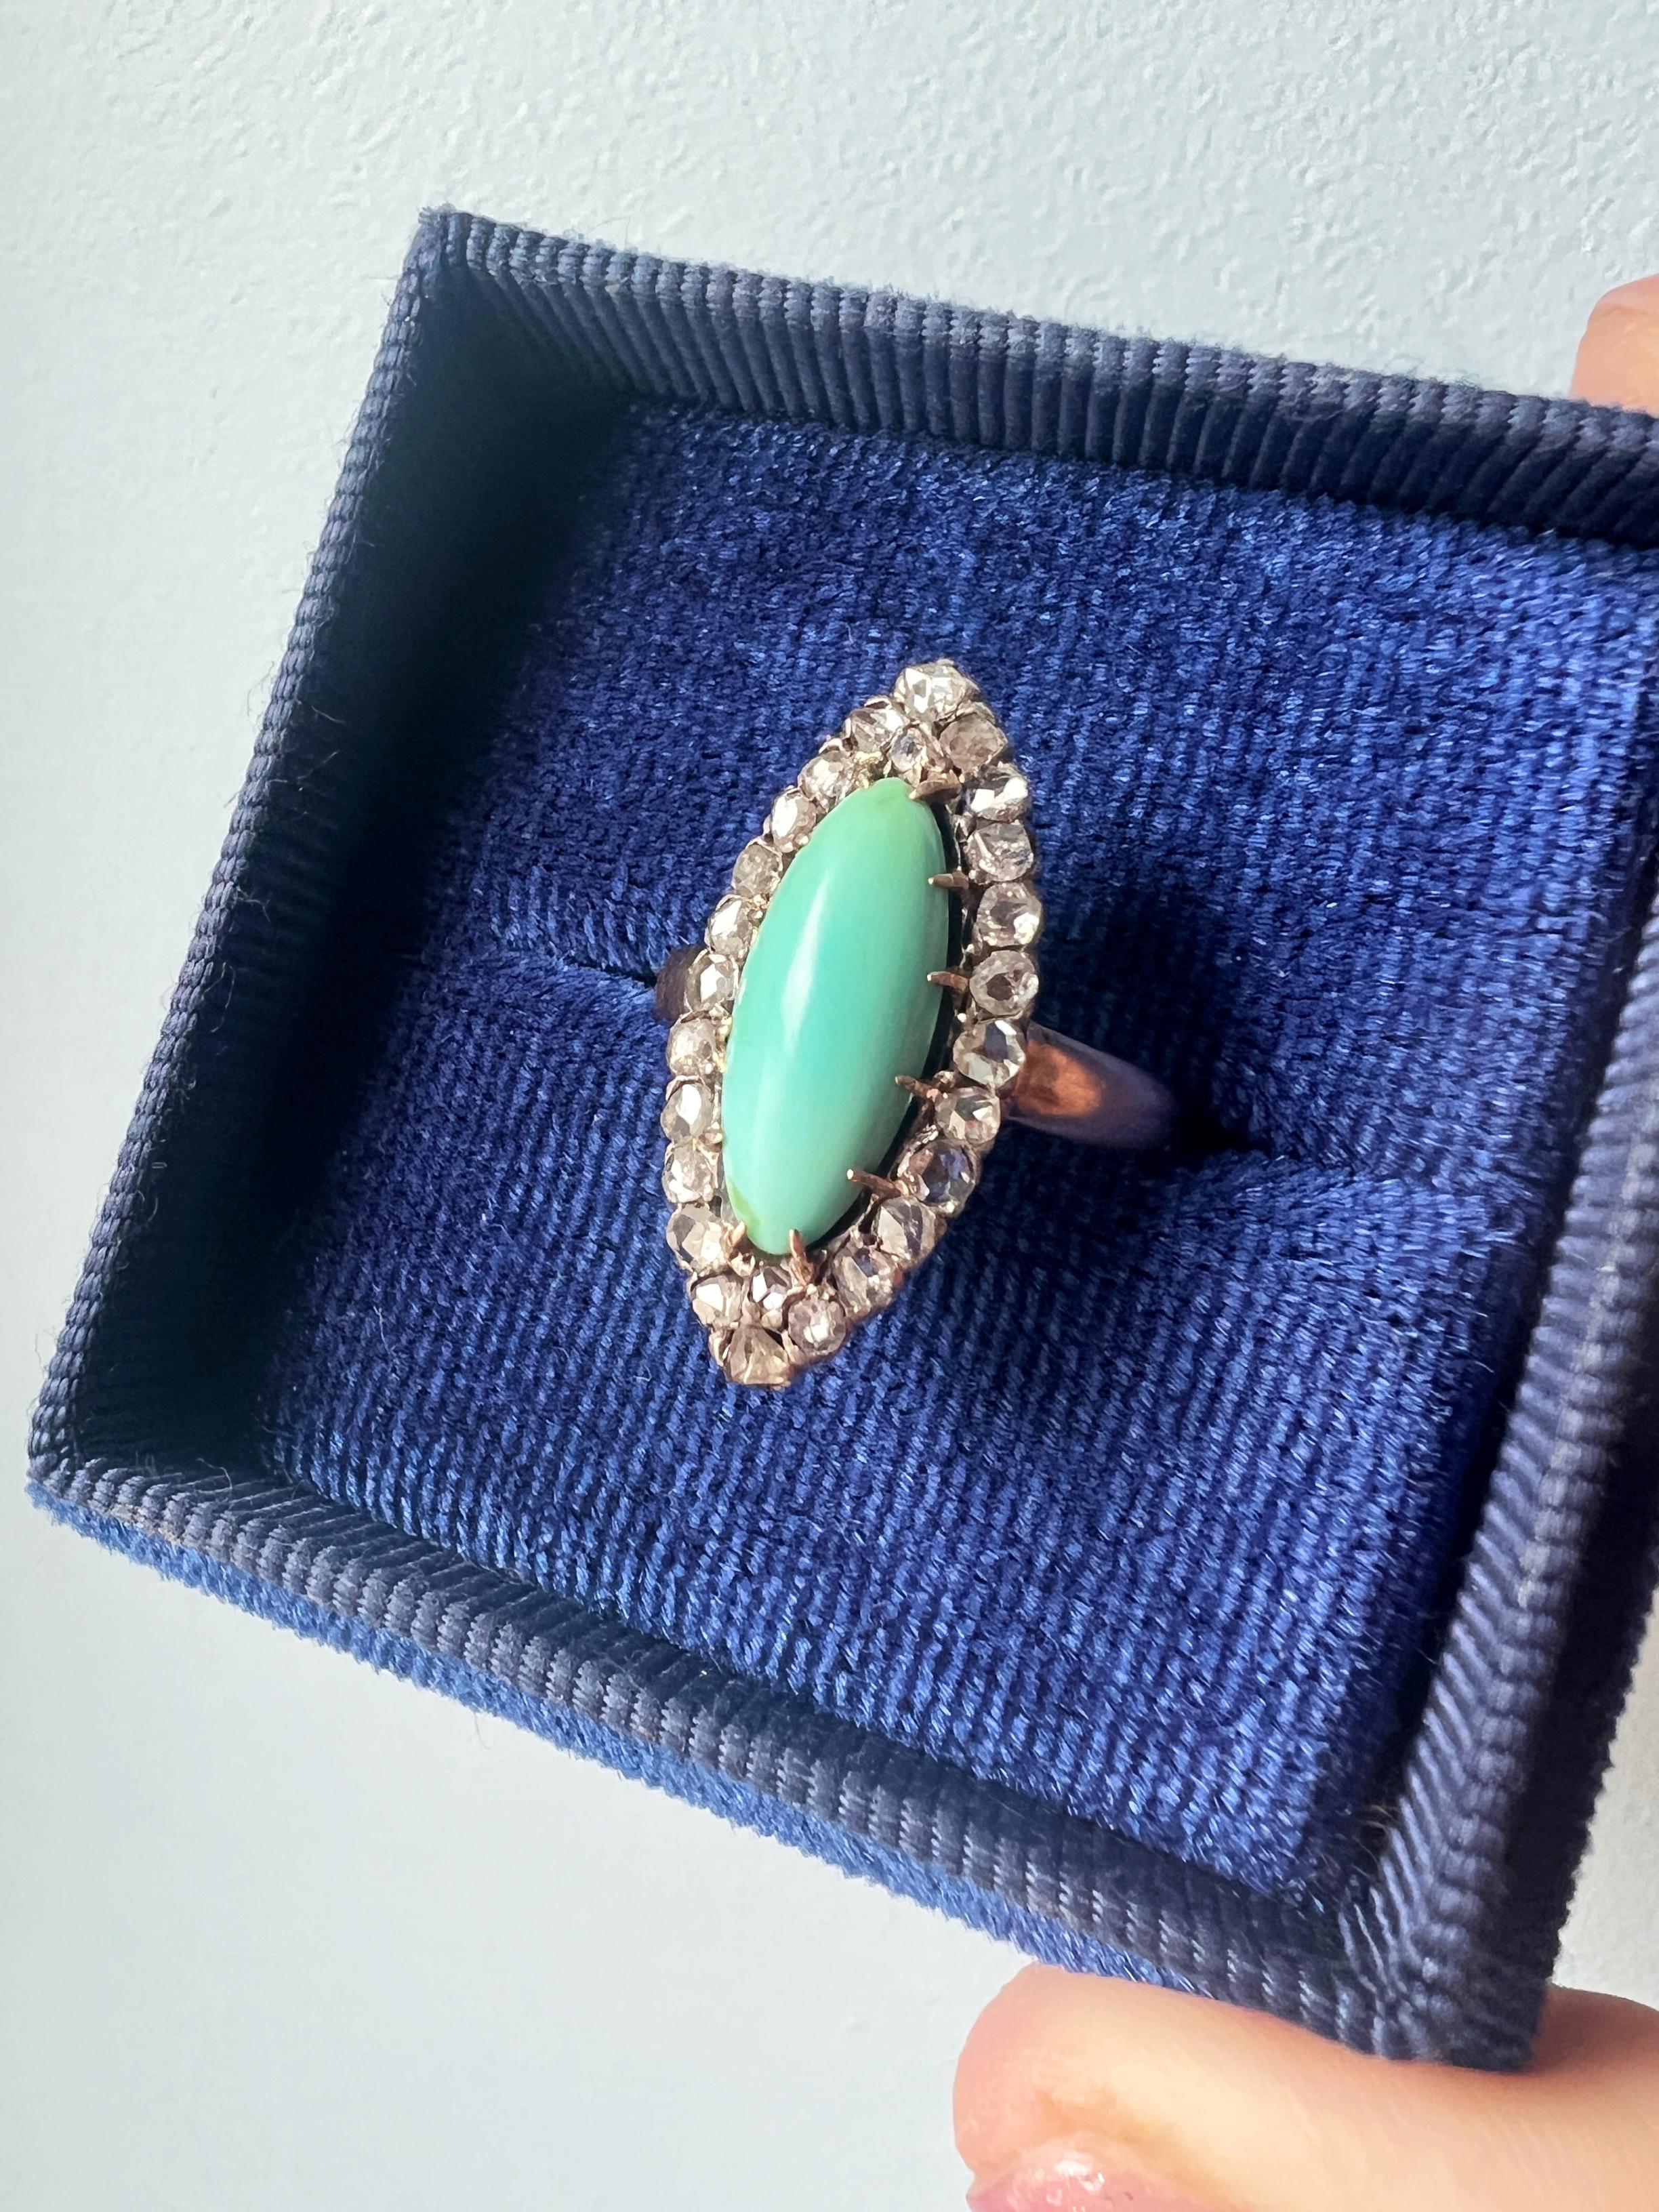 For sale a 19th century, Victorian era 18K gold marquise ring featuring a beautiful turquoise with a circle of rose cut diamonds around.

The central turquoise cabochon shows a beautiful waxy greenish blue color and it measures 15mm in length and